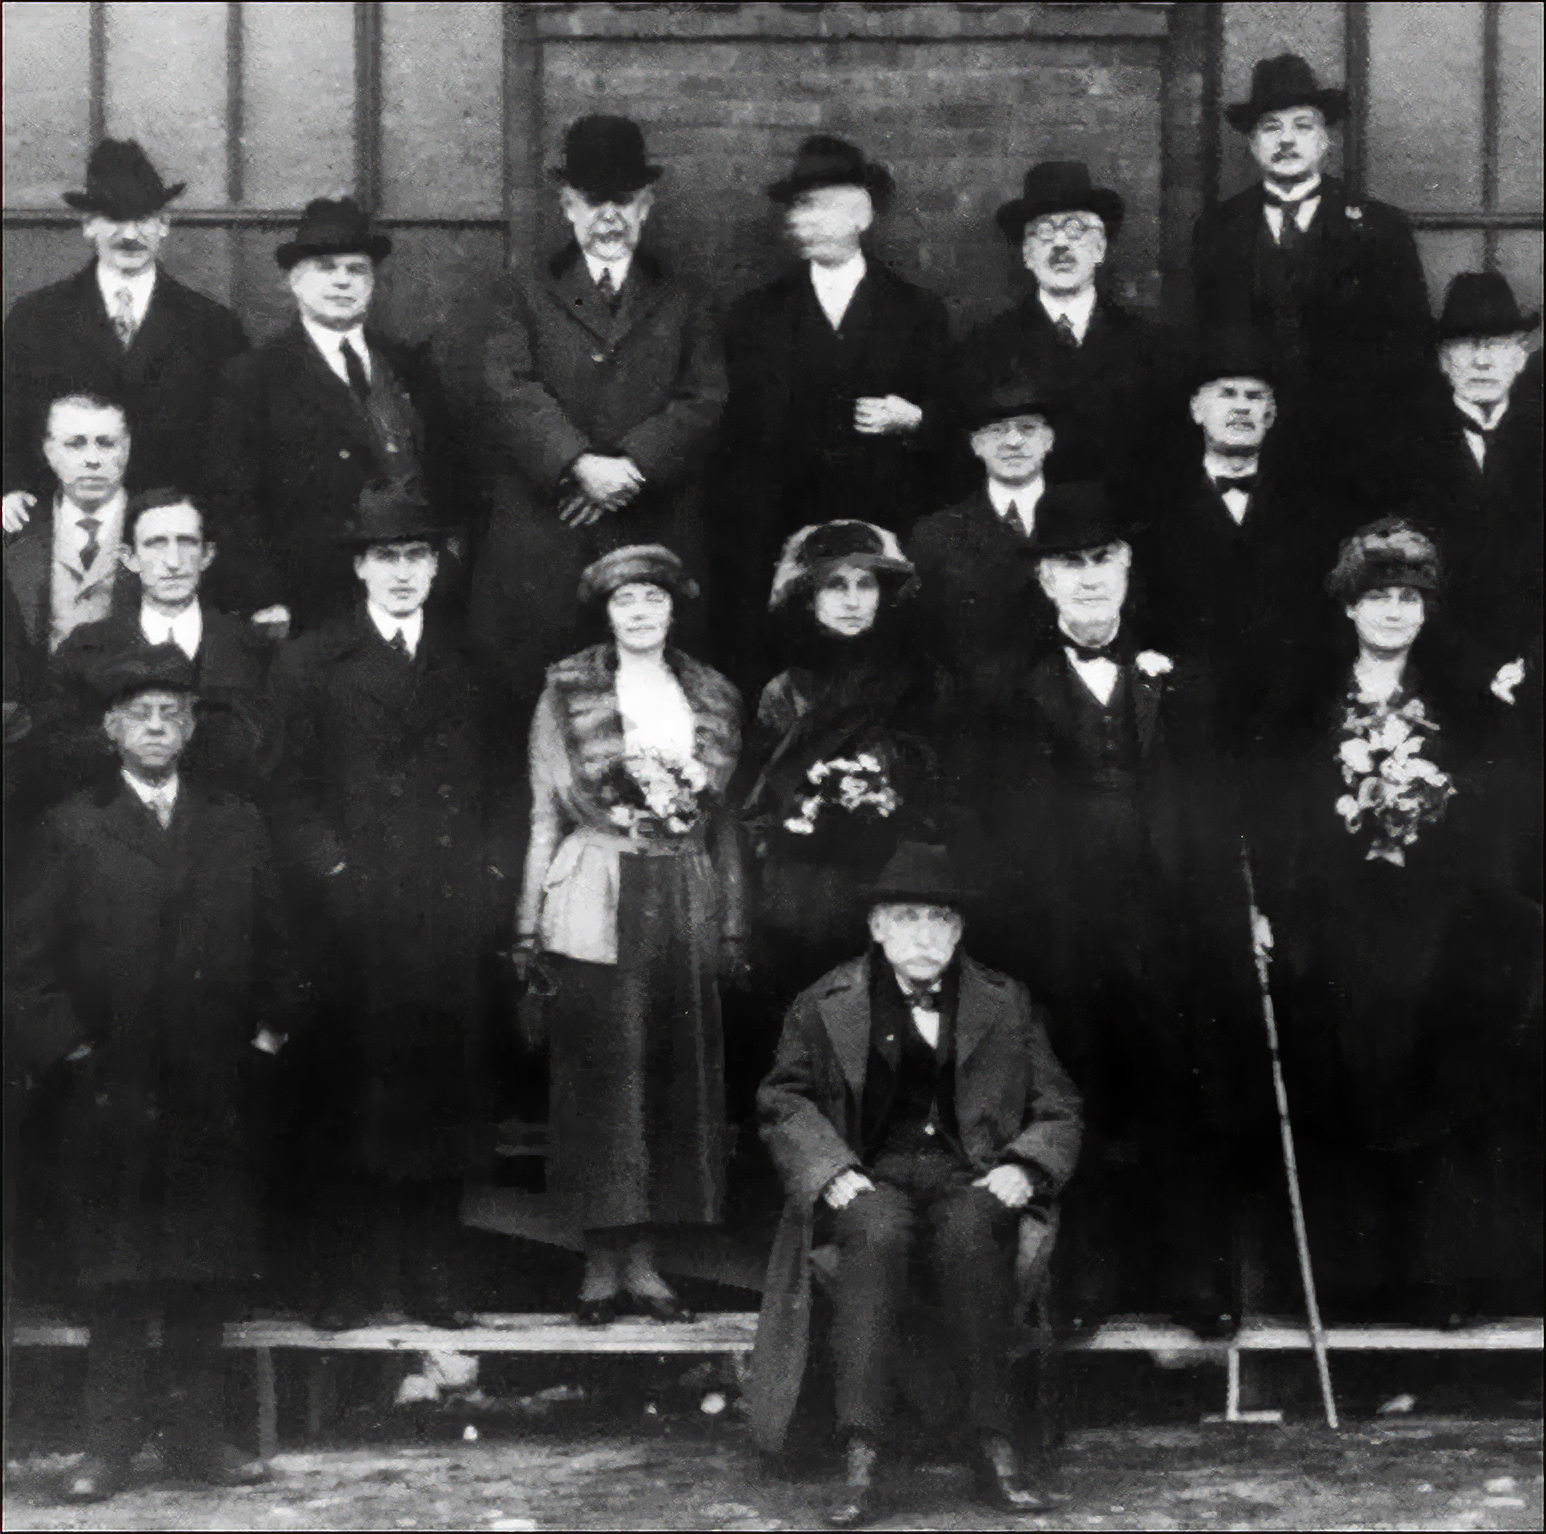 a group 18 well-dressed men and women are standing, and one man is sitting, in a photo taken in 1920. 